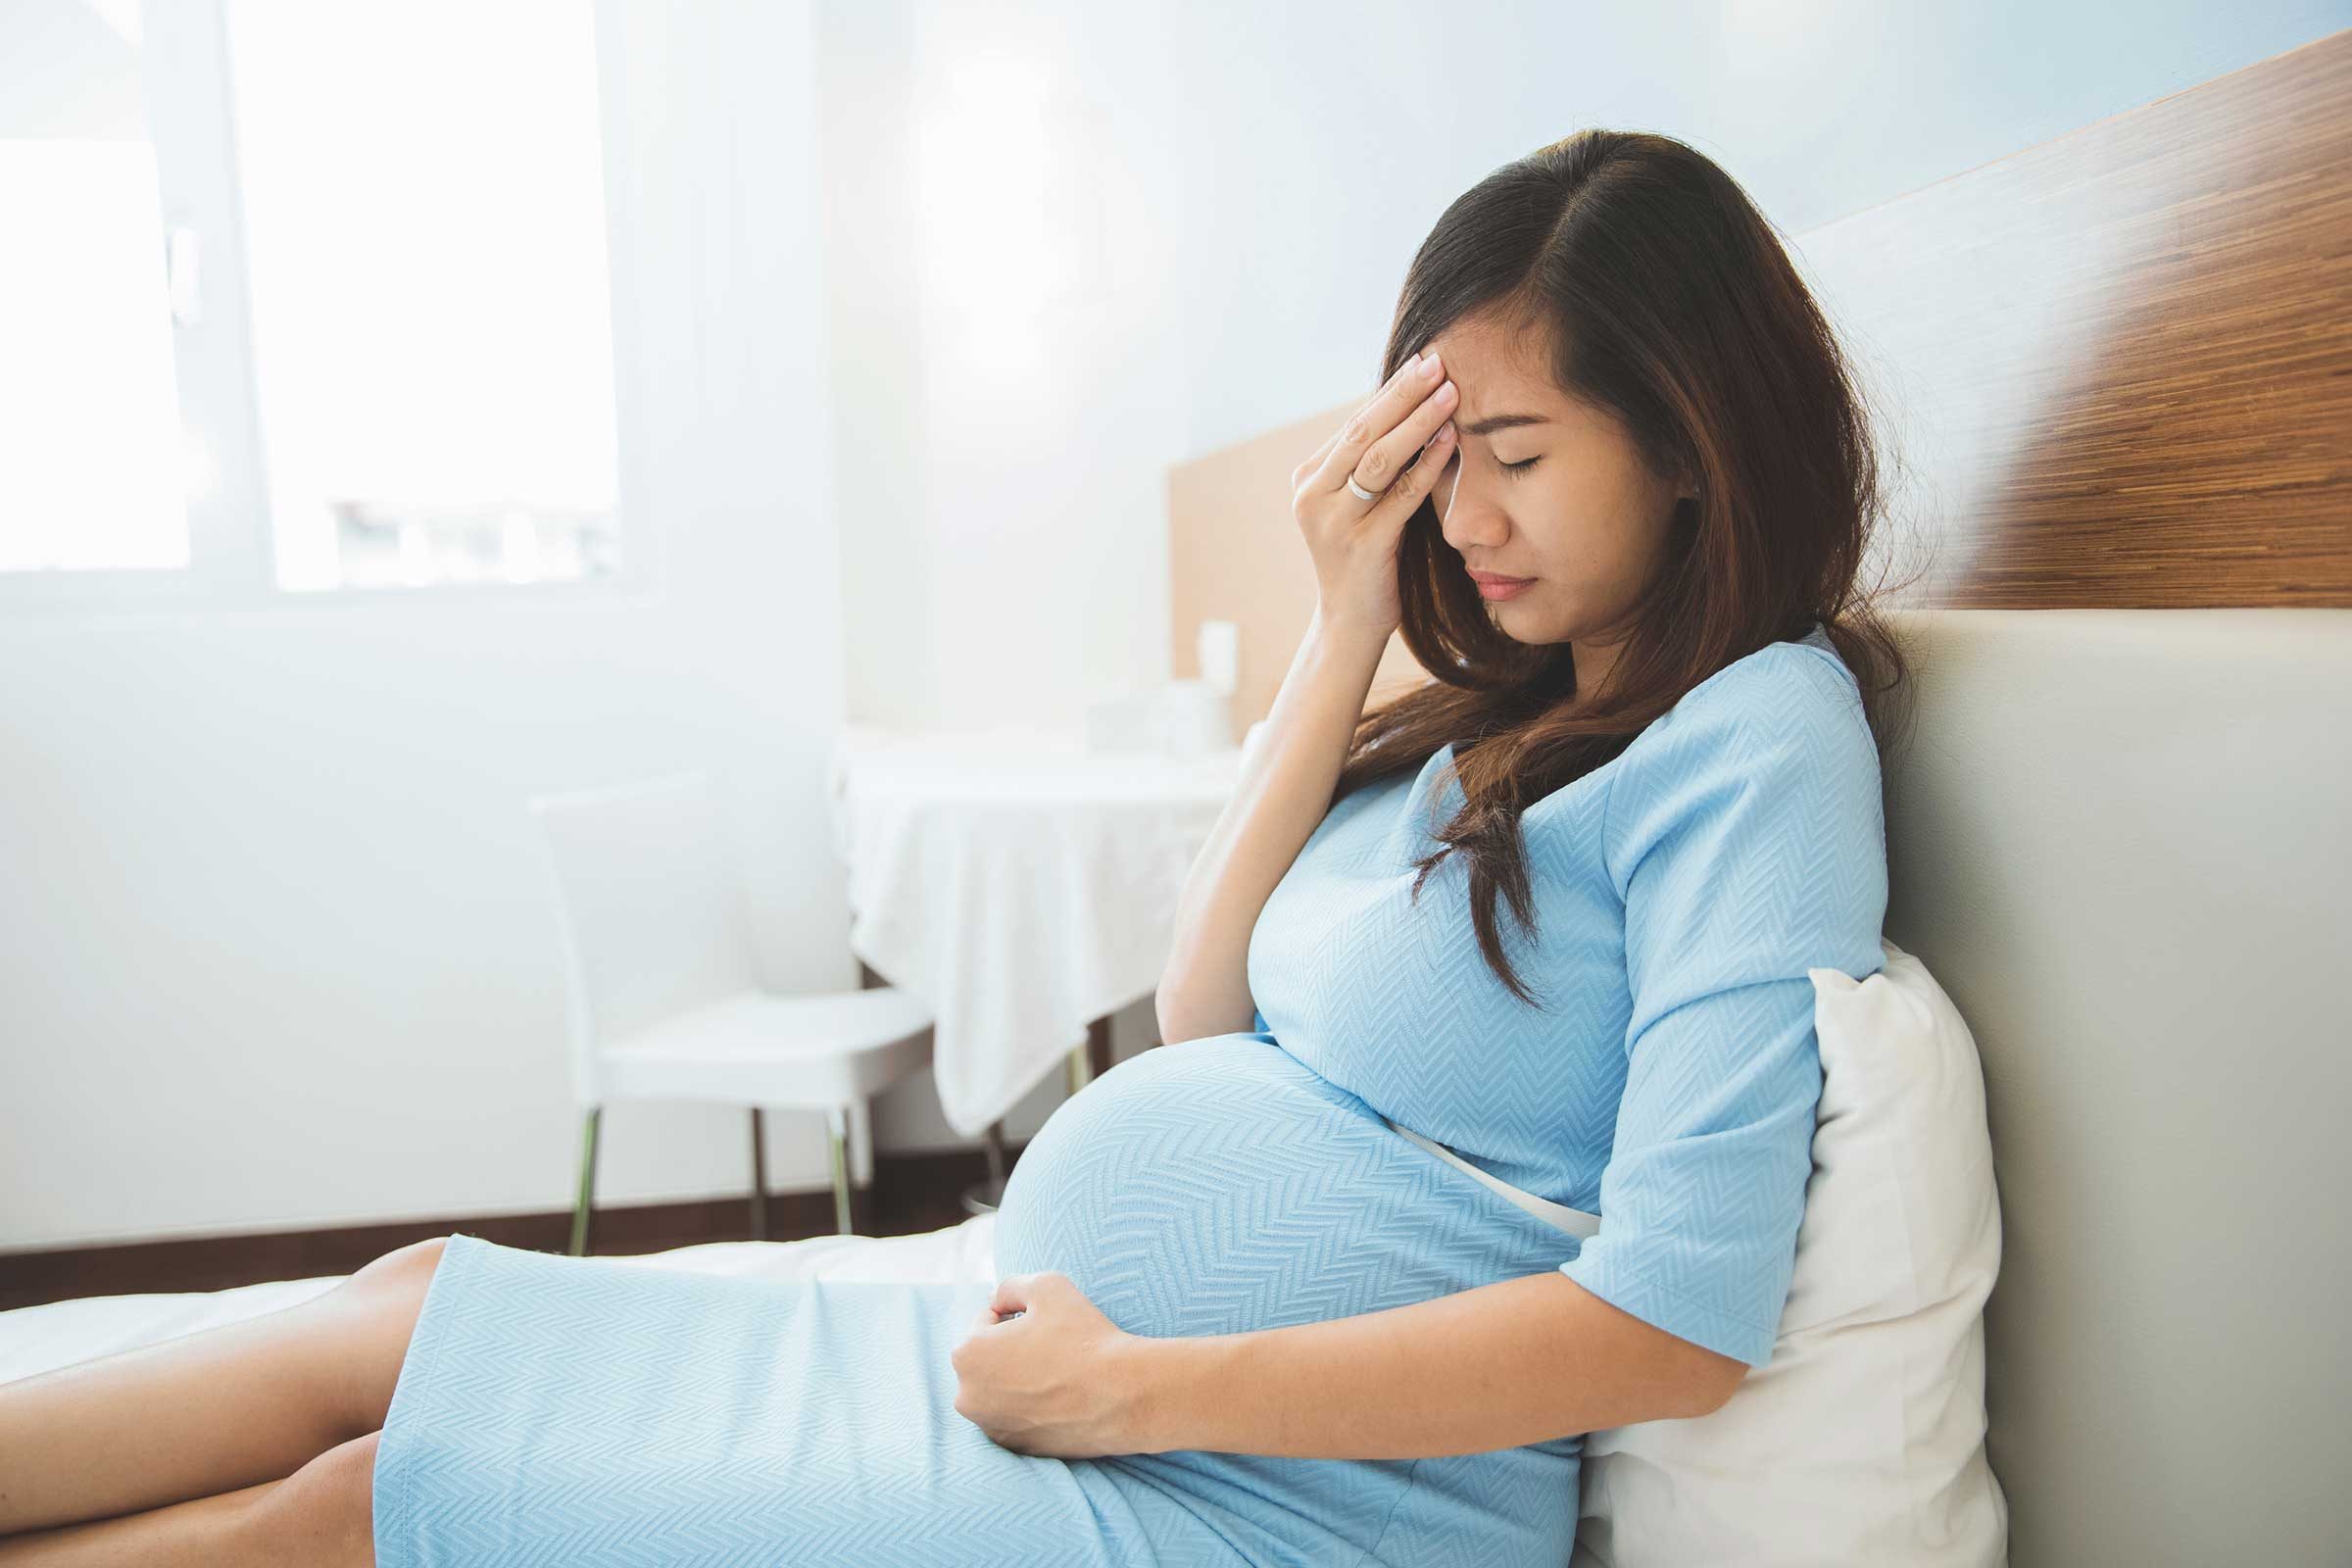 11 Silent Signs of Preeclampsia Every Woman Should Know